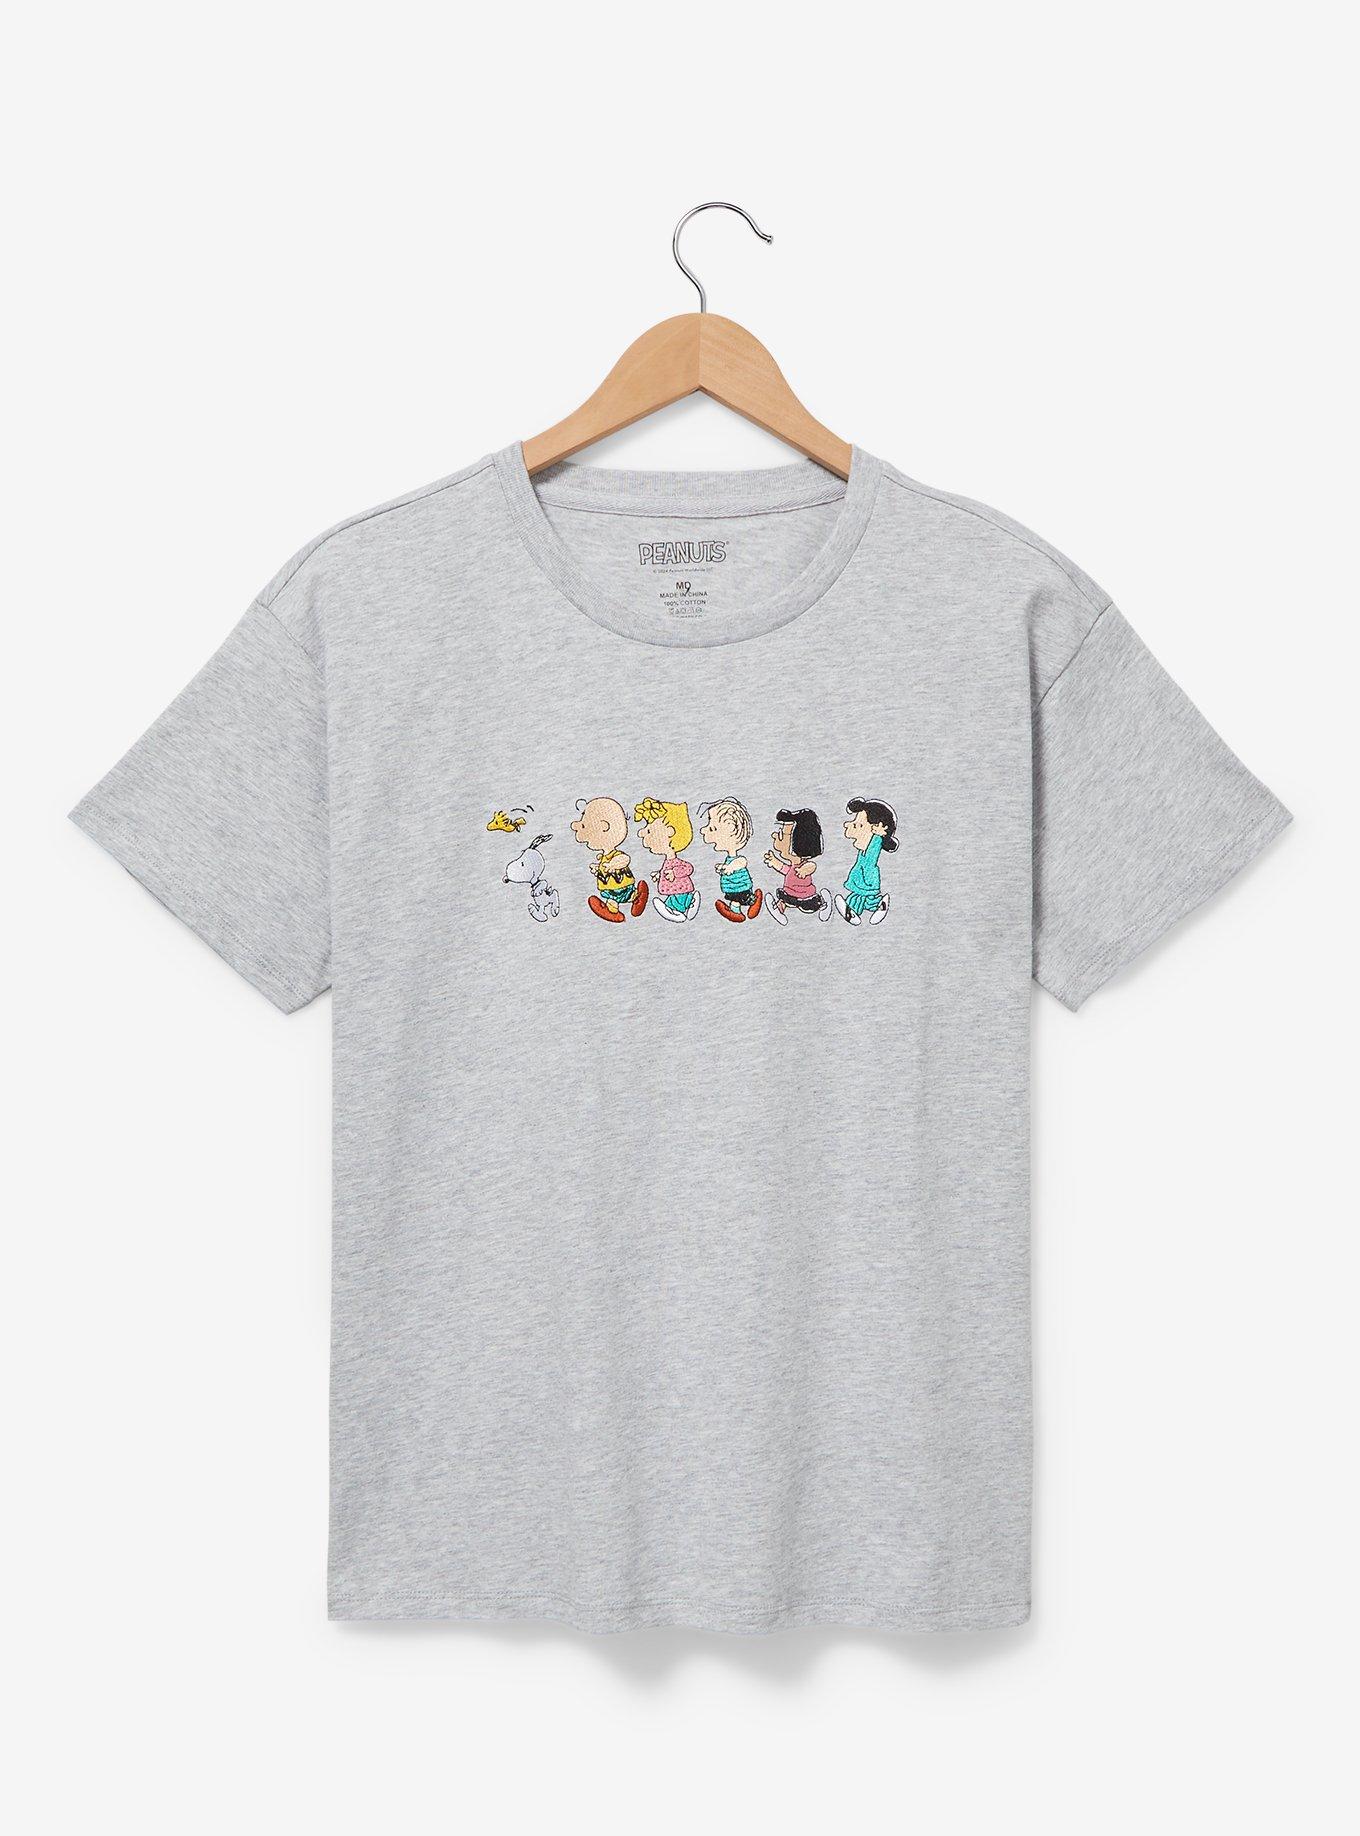 Peanuts Characters Running Women's T-Shirt - BoxLunch Exclusive